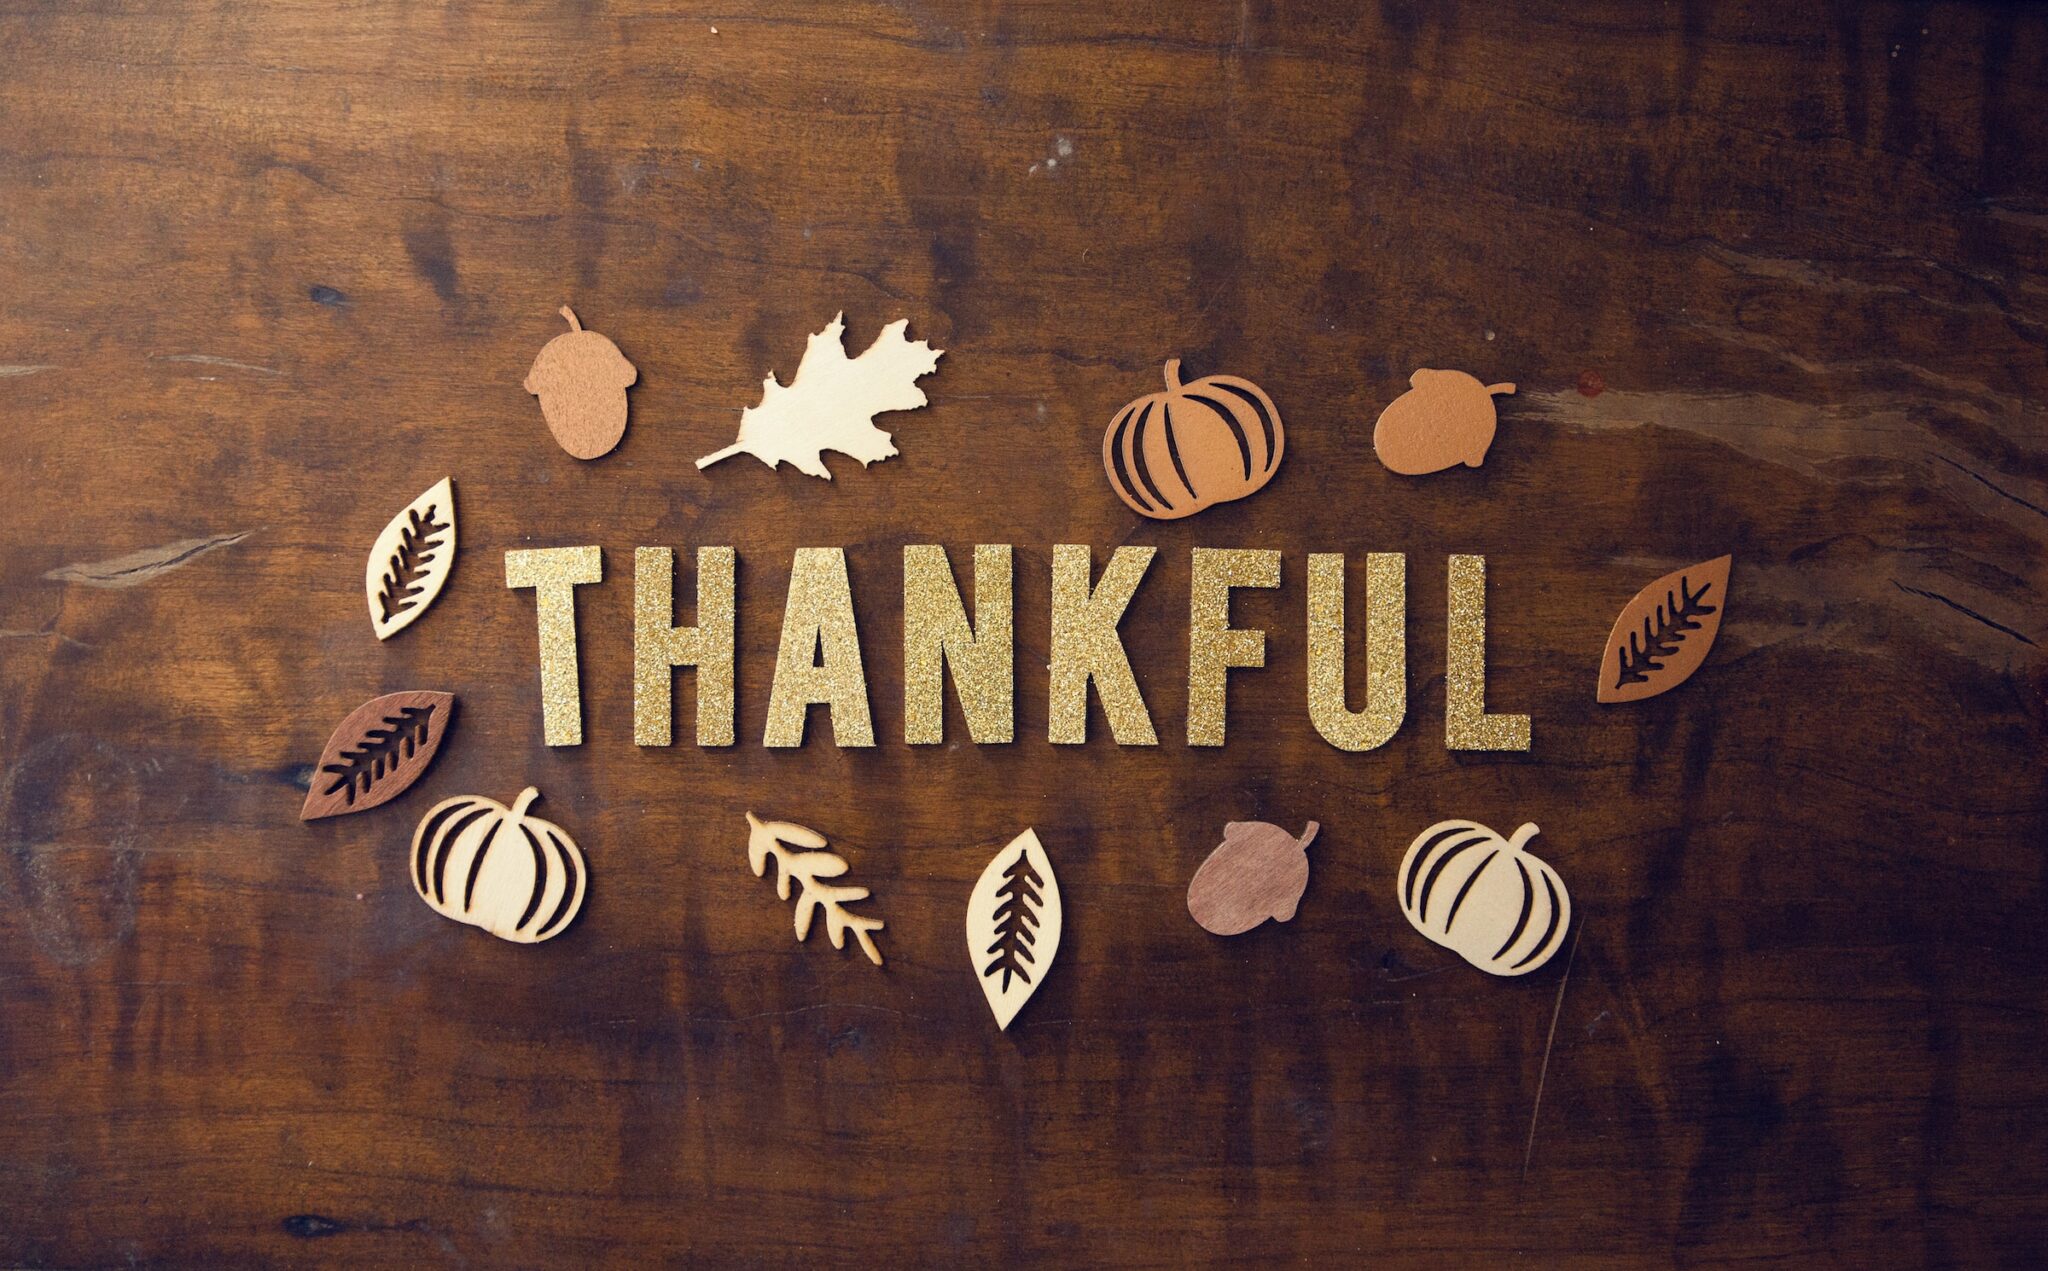 The word “thankful” surrounded by leaves, pumpkins, and acorns